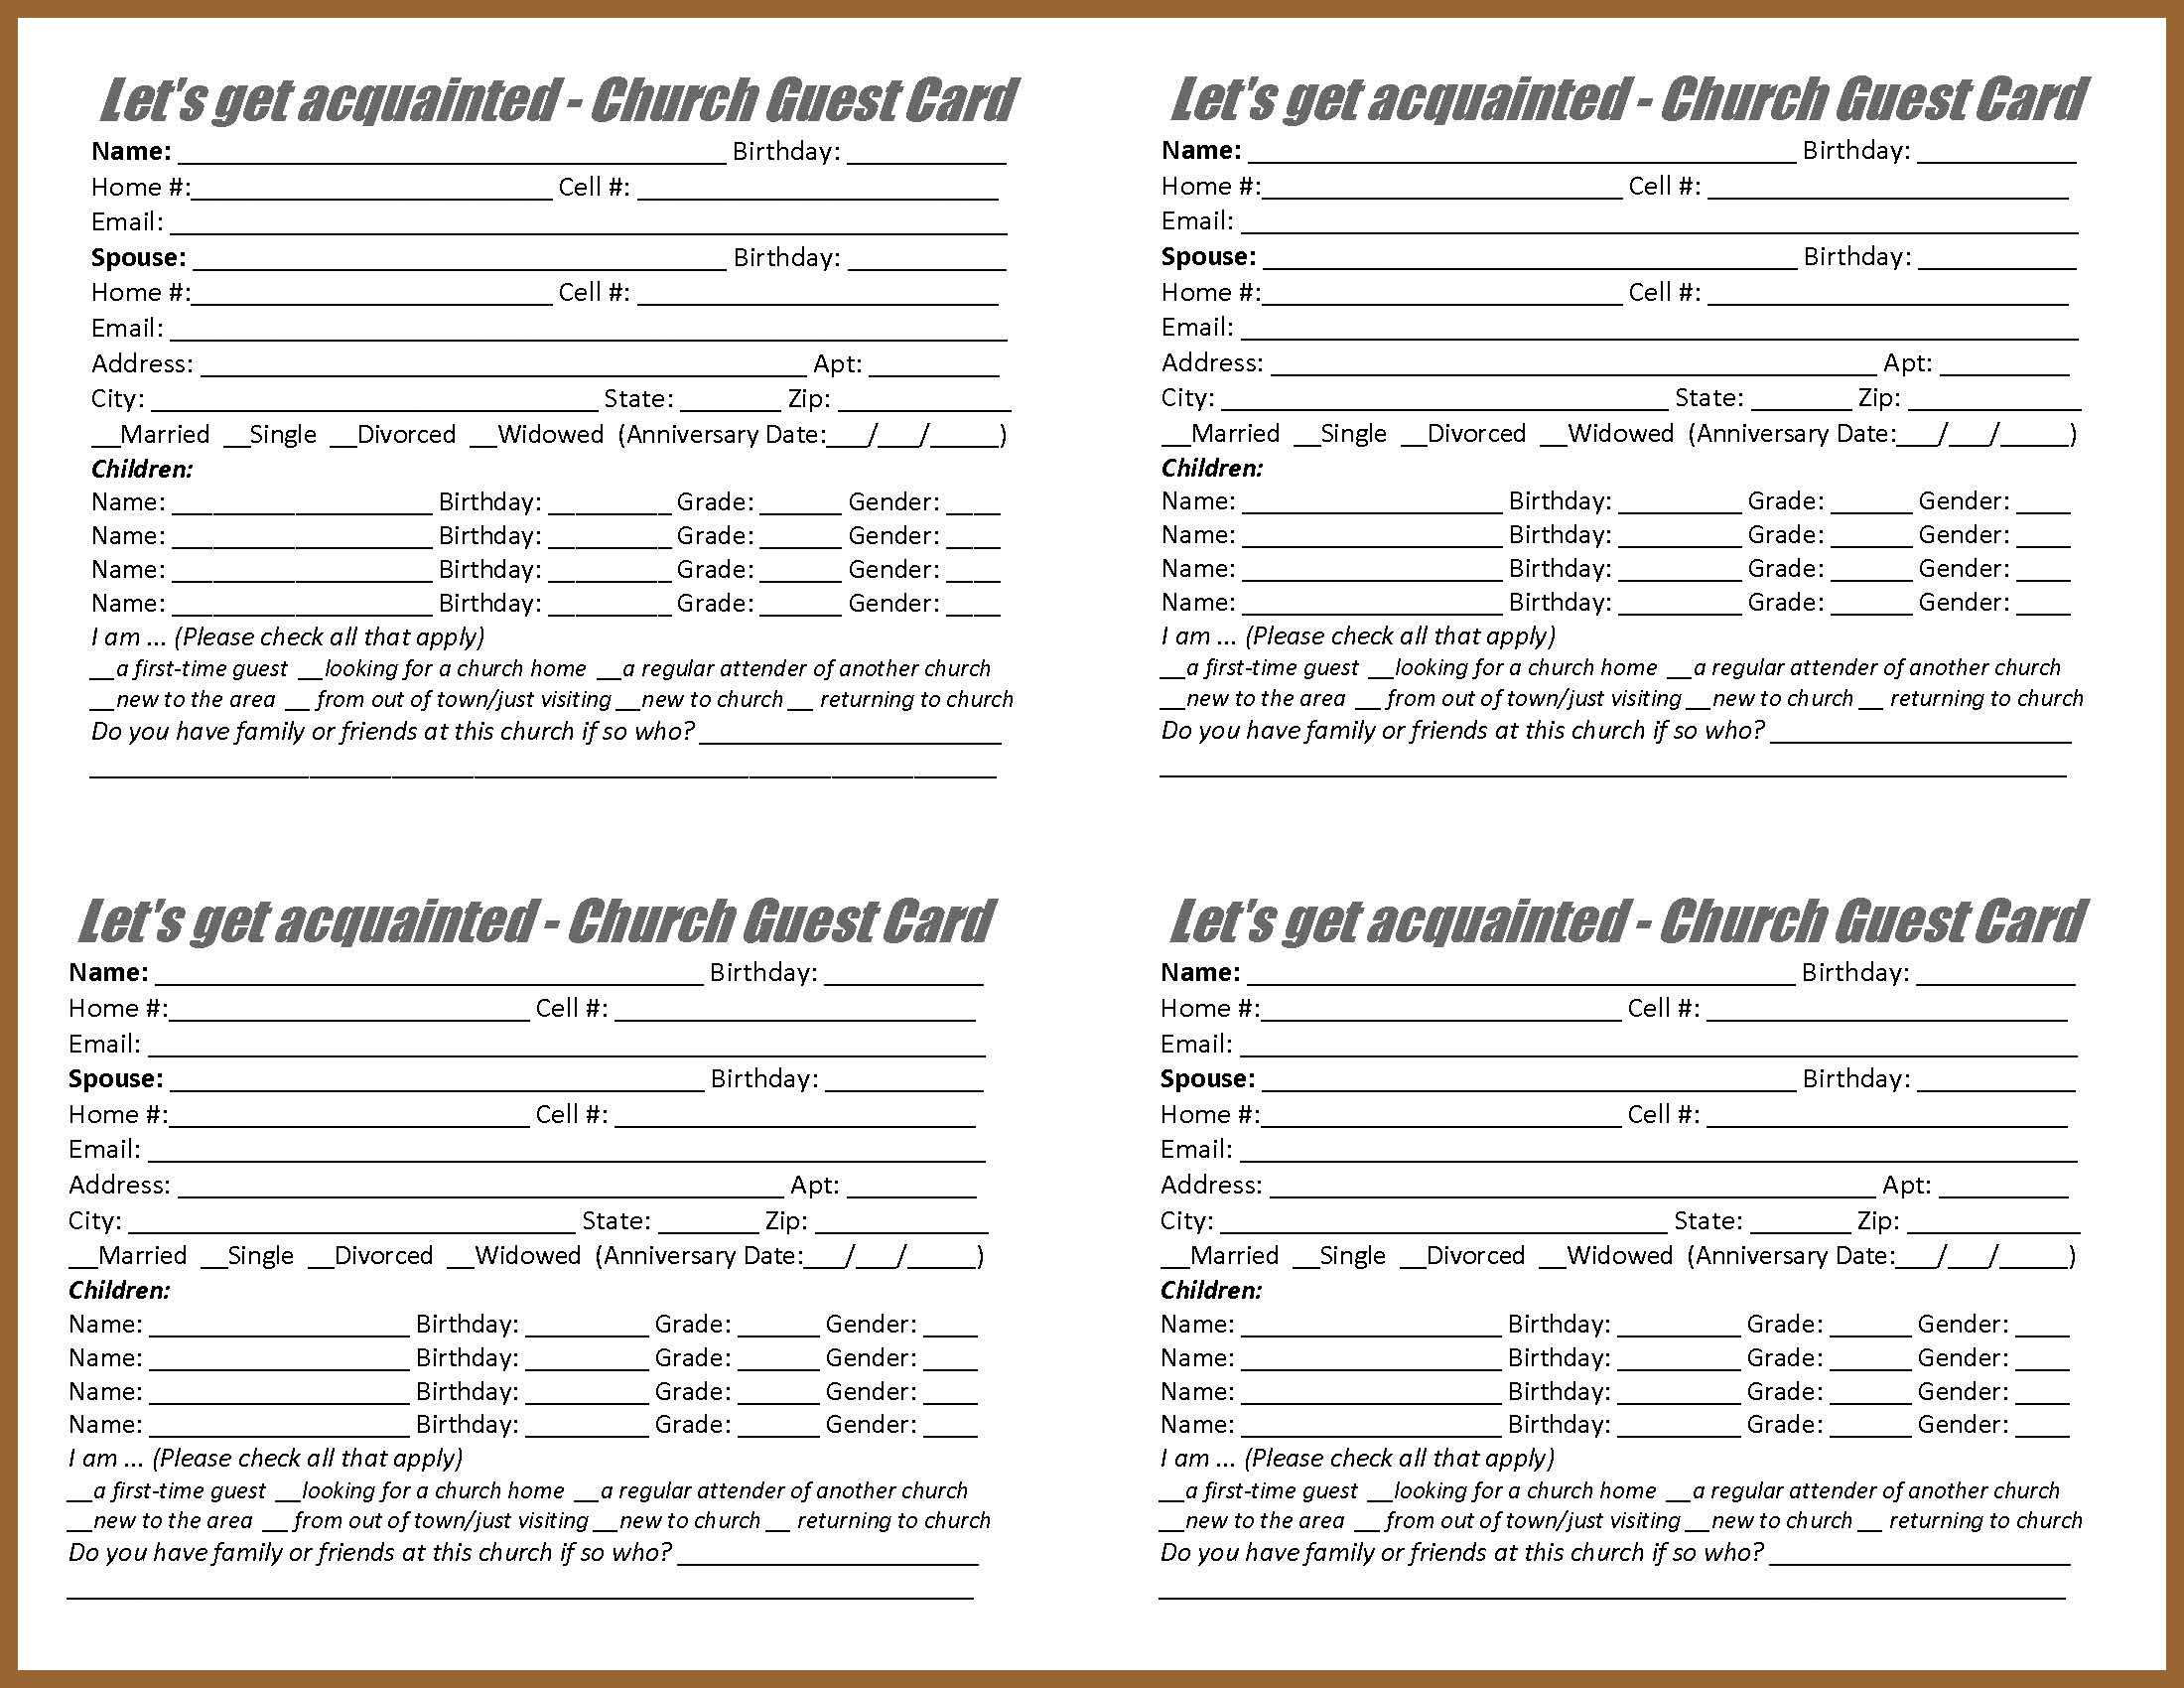 Search And Rescue Ministry Forms Inside Church Visitor Card Template